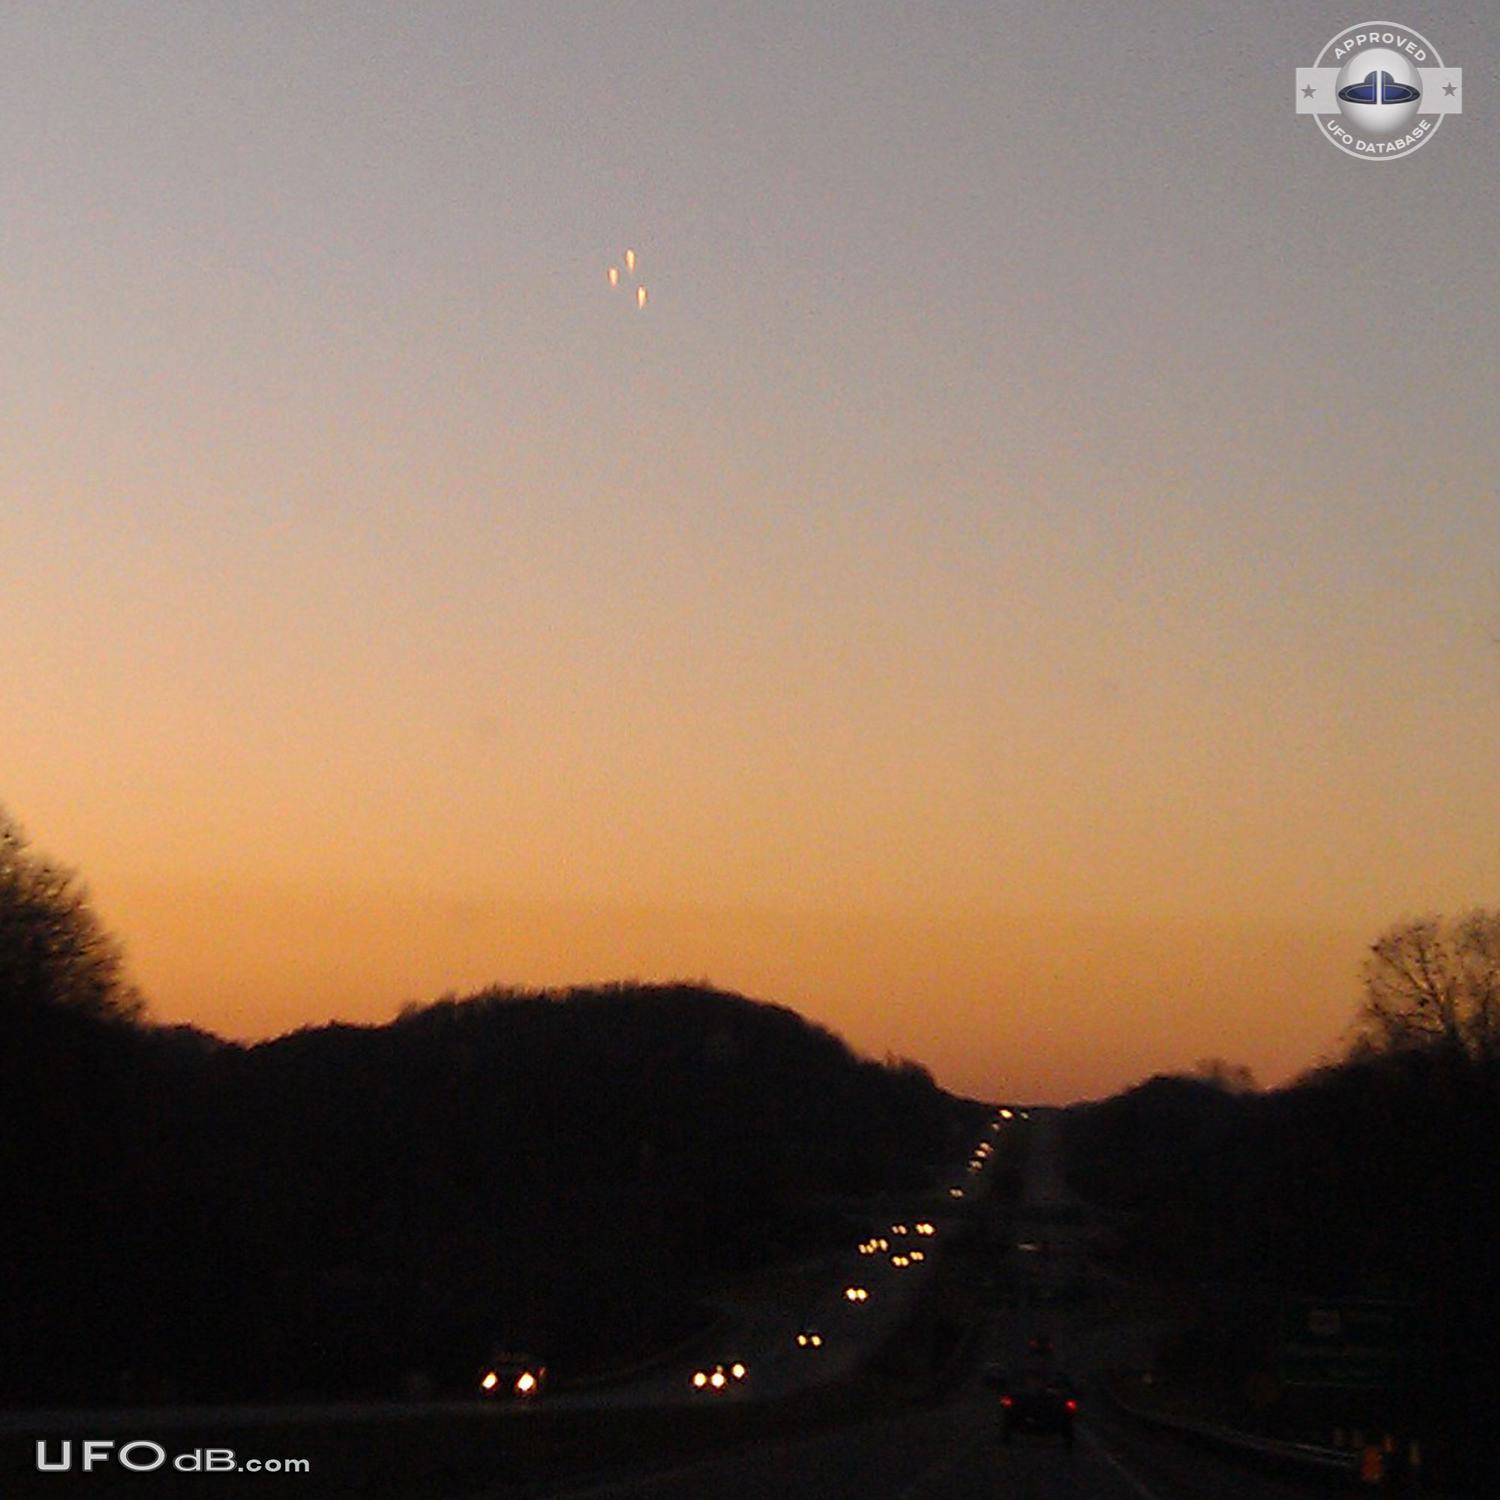 UFO orbs in Triangle formation over Nuclear plant in Pennsylvania 2012 UFO Picture #528-2